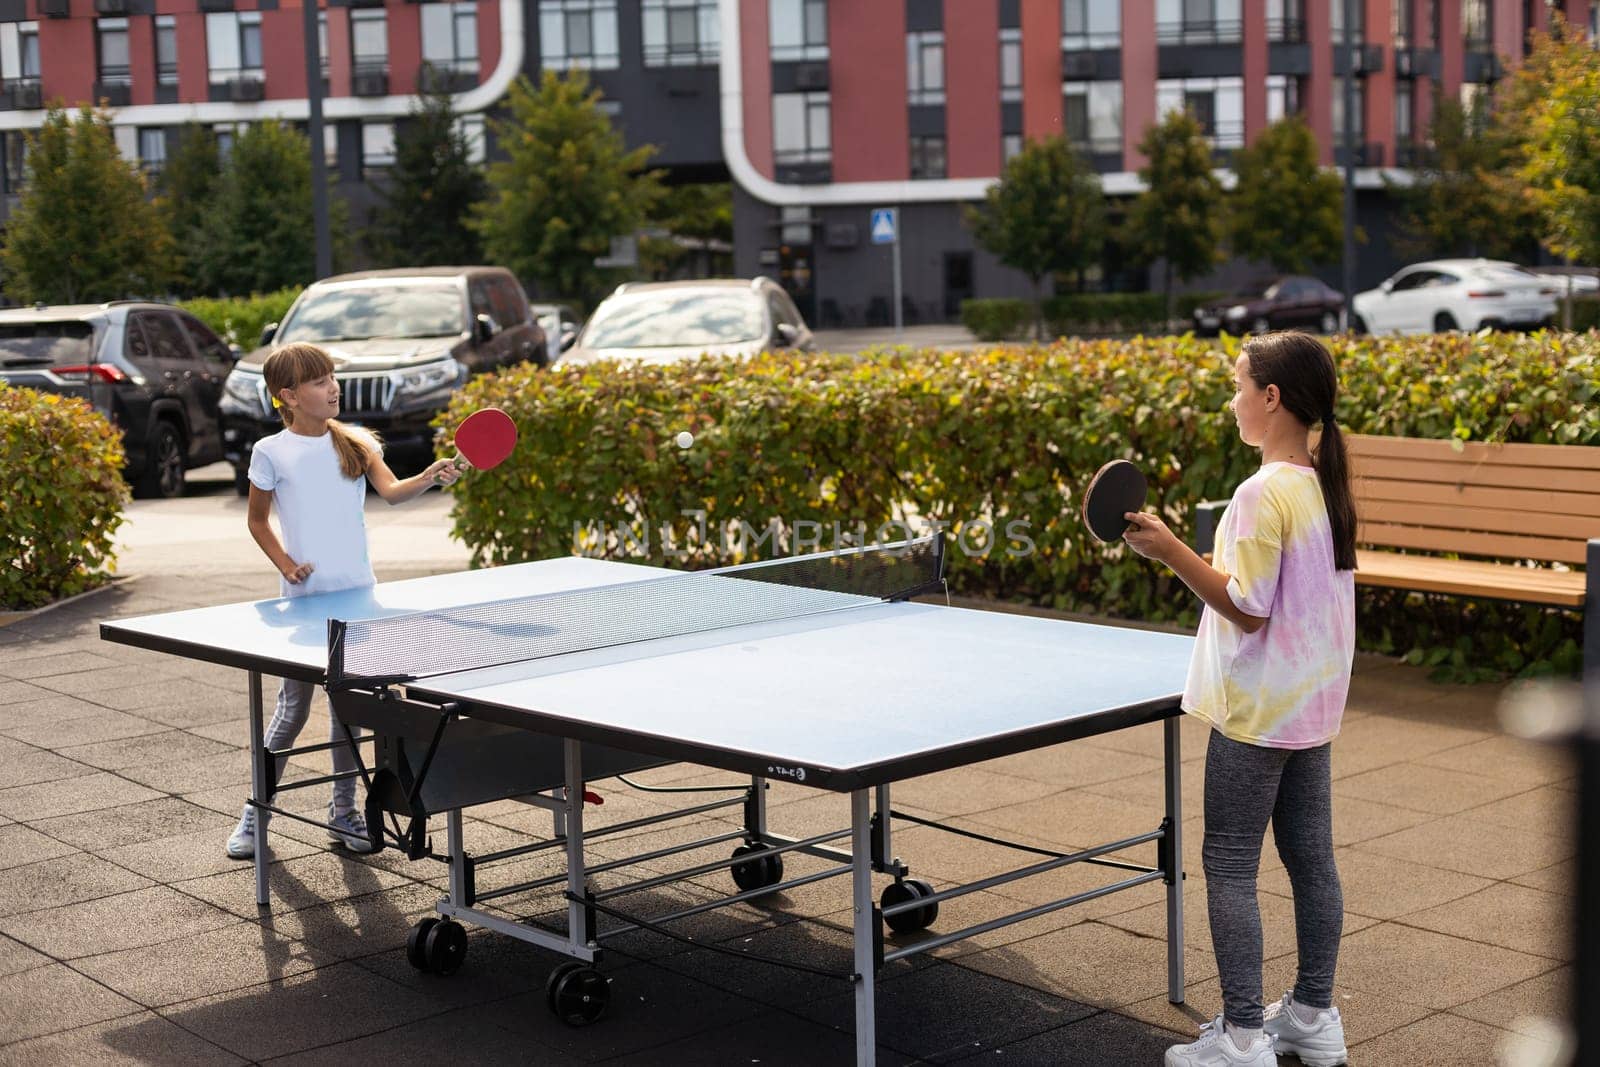 Little children playing ping pong in park. High quality photo